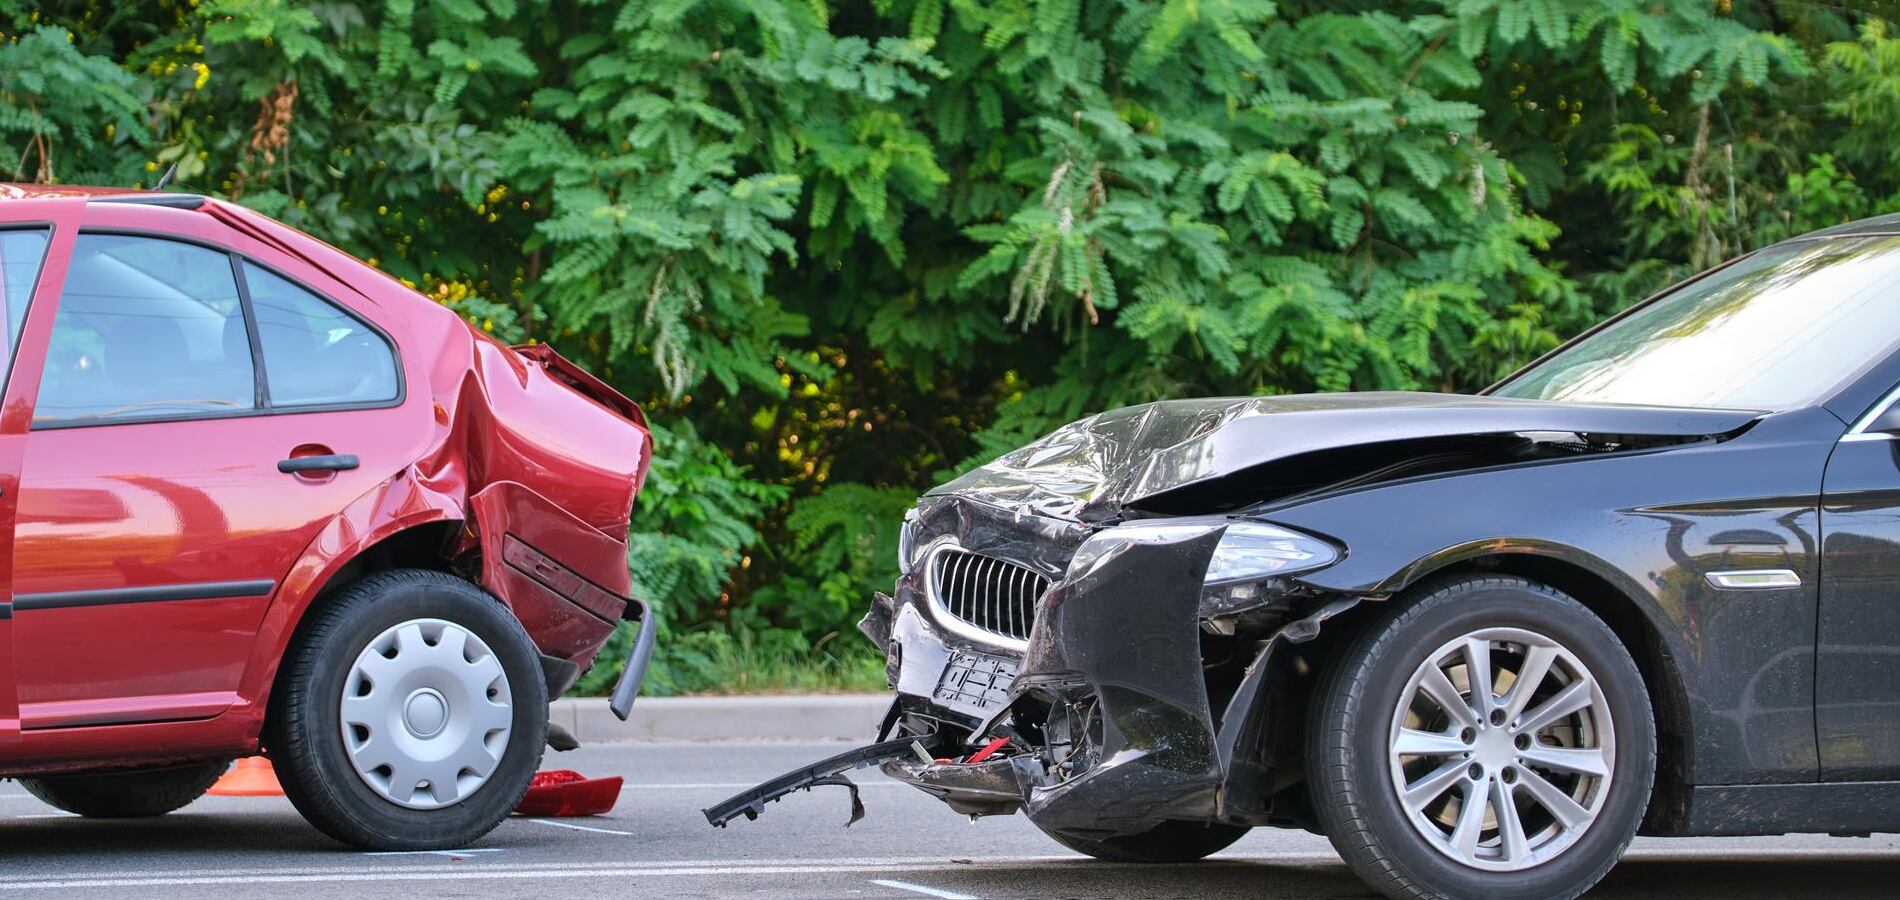 Car Accident Lawyer in Fullerton, CA